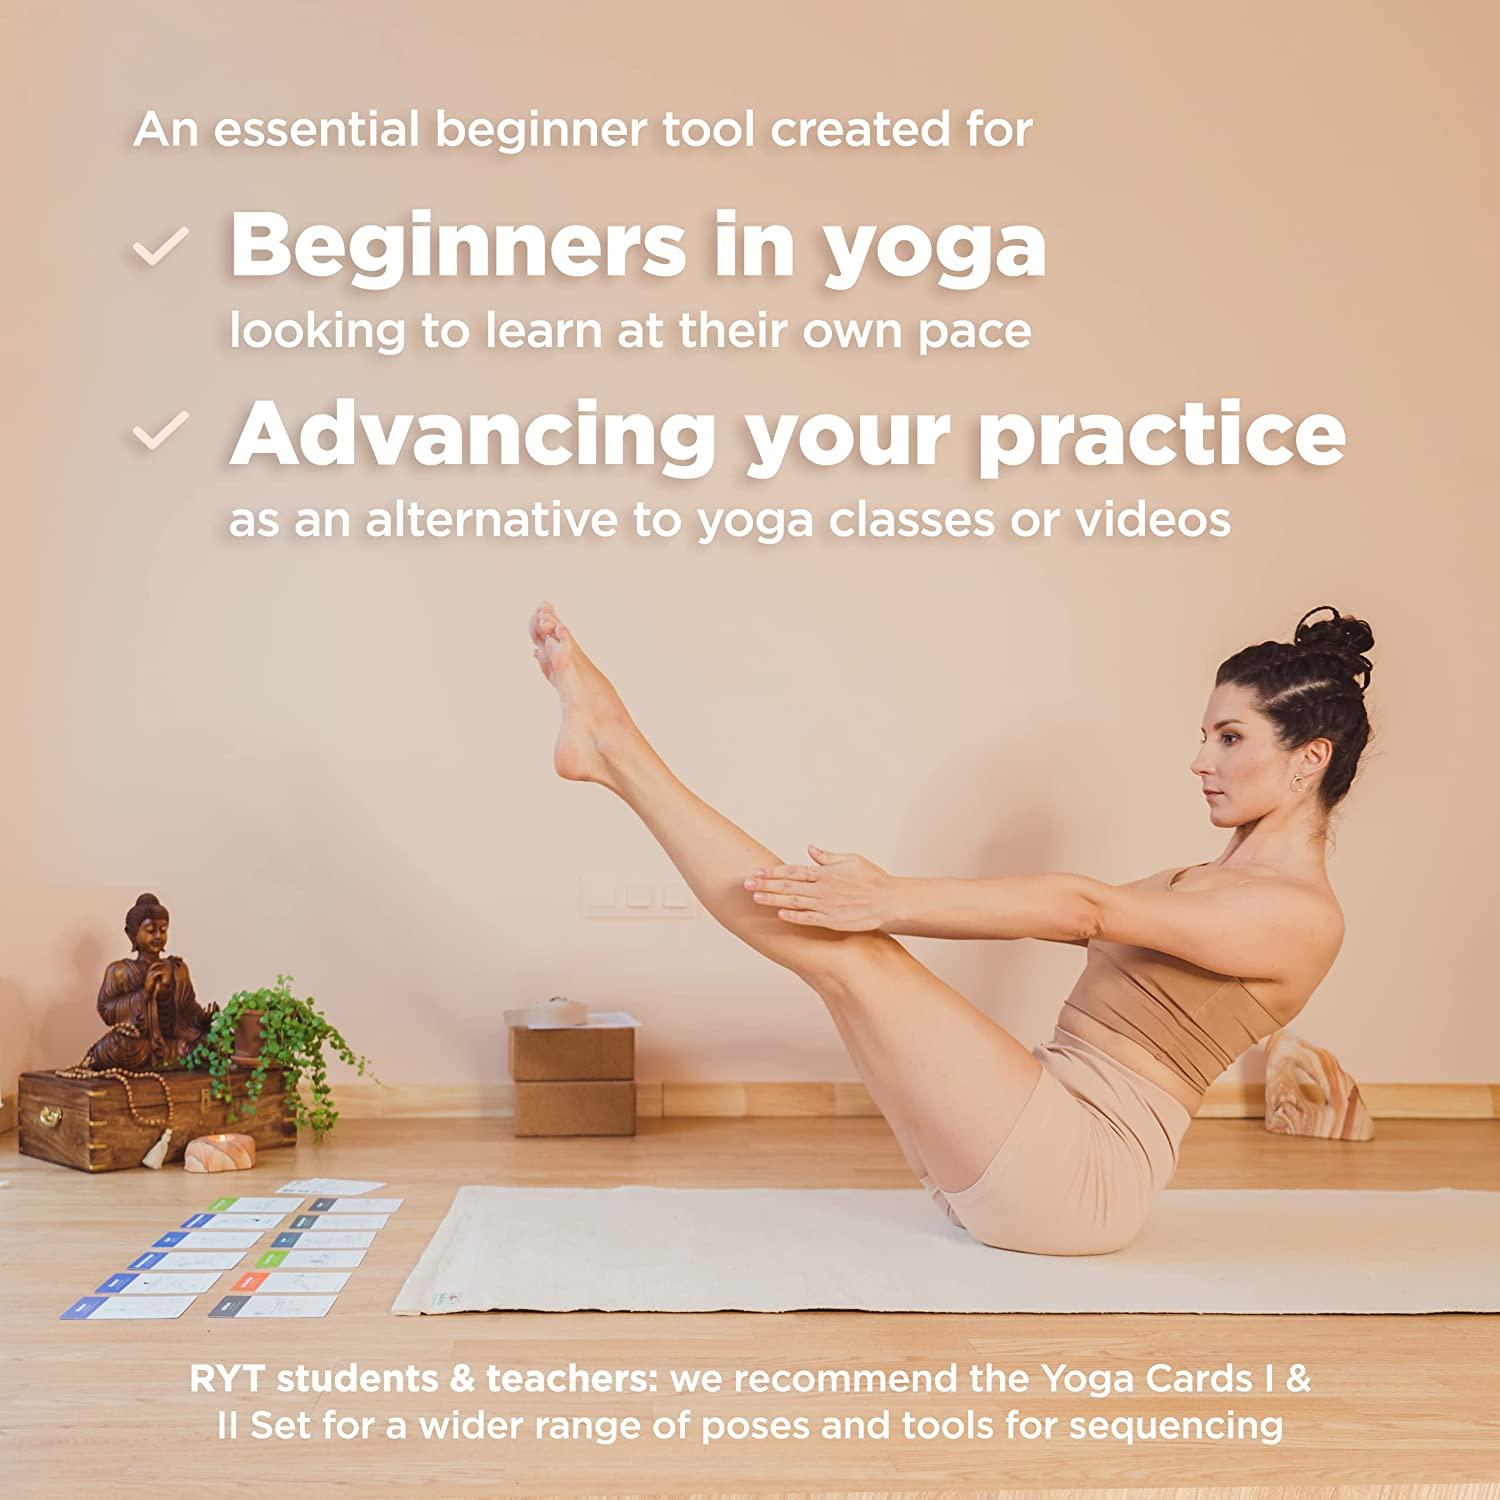 WorkoutLabs Yoga Cards Beginner: Visual Study, Class Sequencing